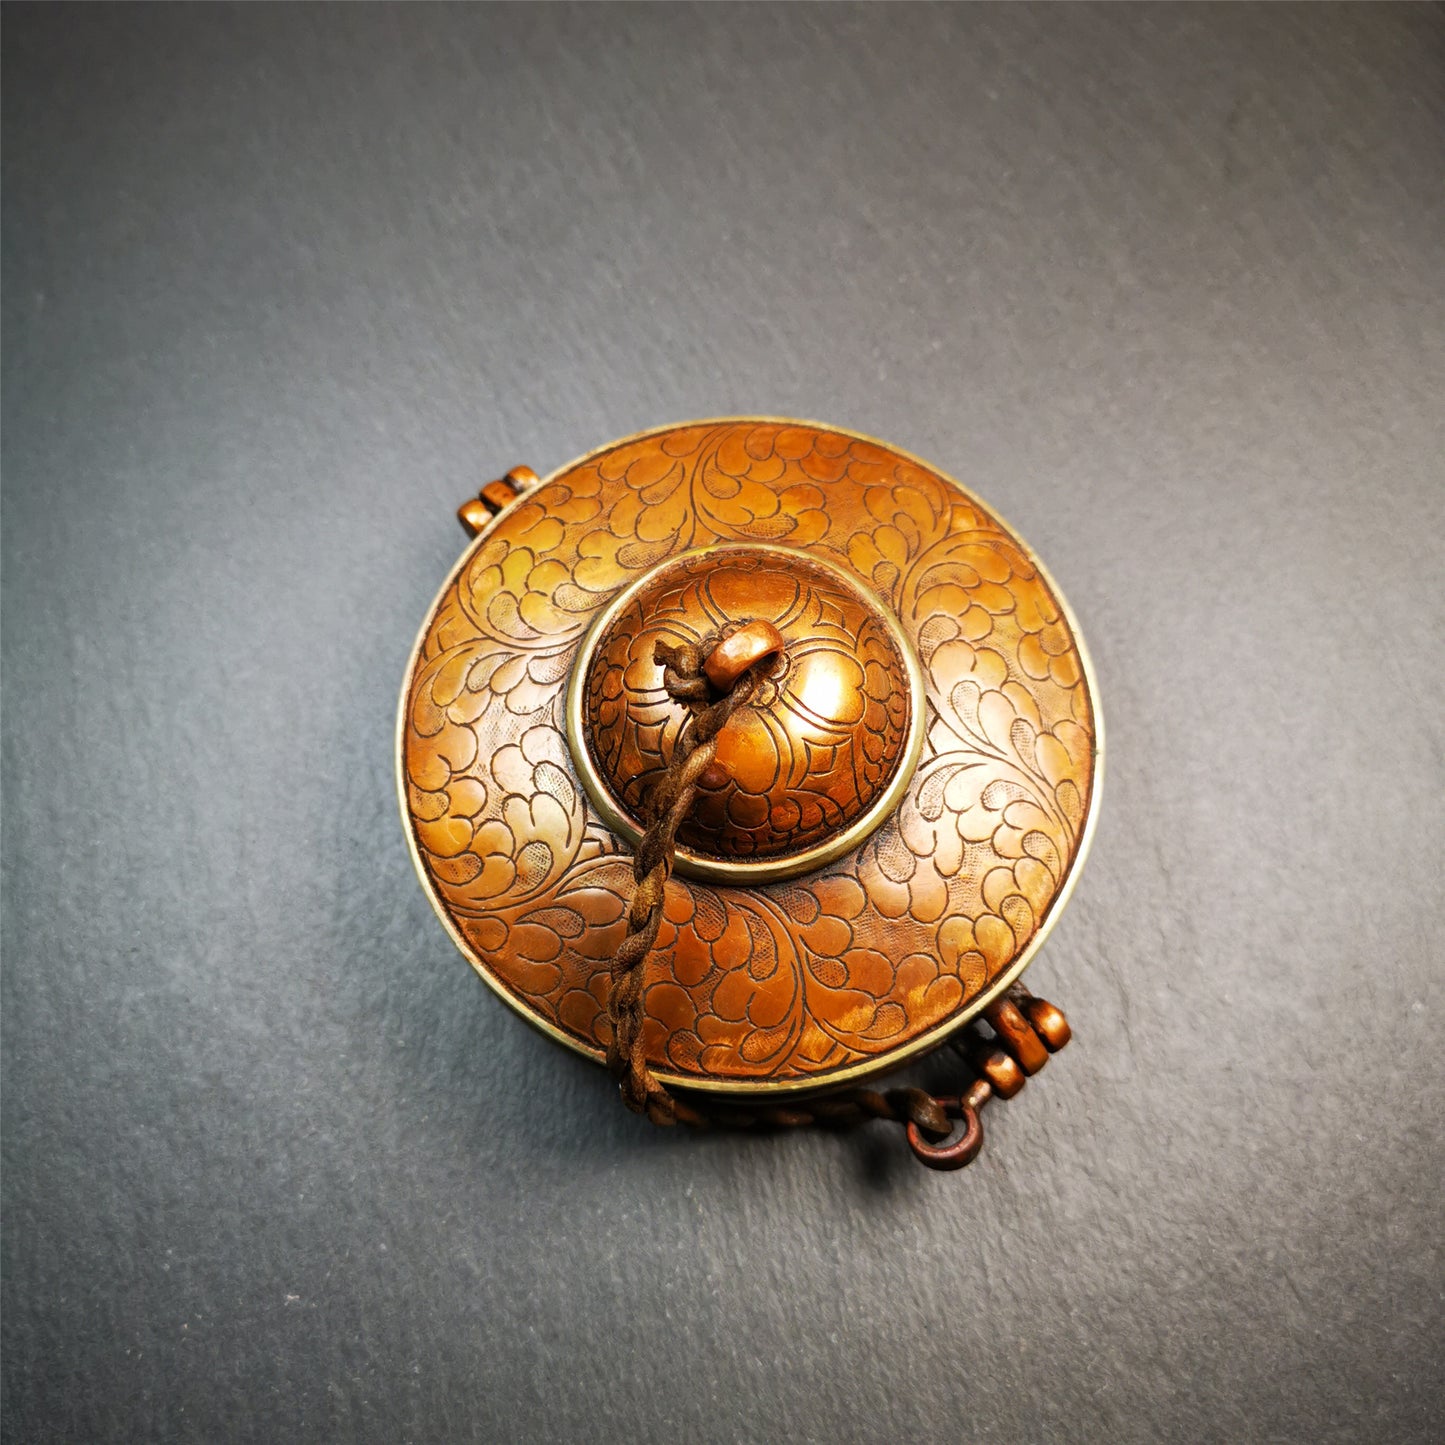 This tingsha case was handmade in Nepal,using traditional techniques and materials. It was made of copper and brass, 8.5-10.5cm diameter,carved mandala pattern,a cross vajra pattern at the bottom. Fit for 8-10cm Tingsha.